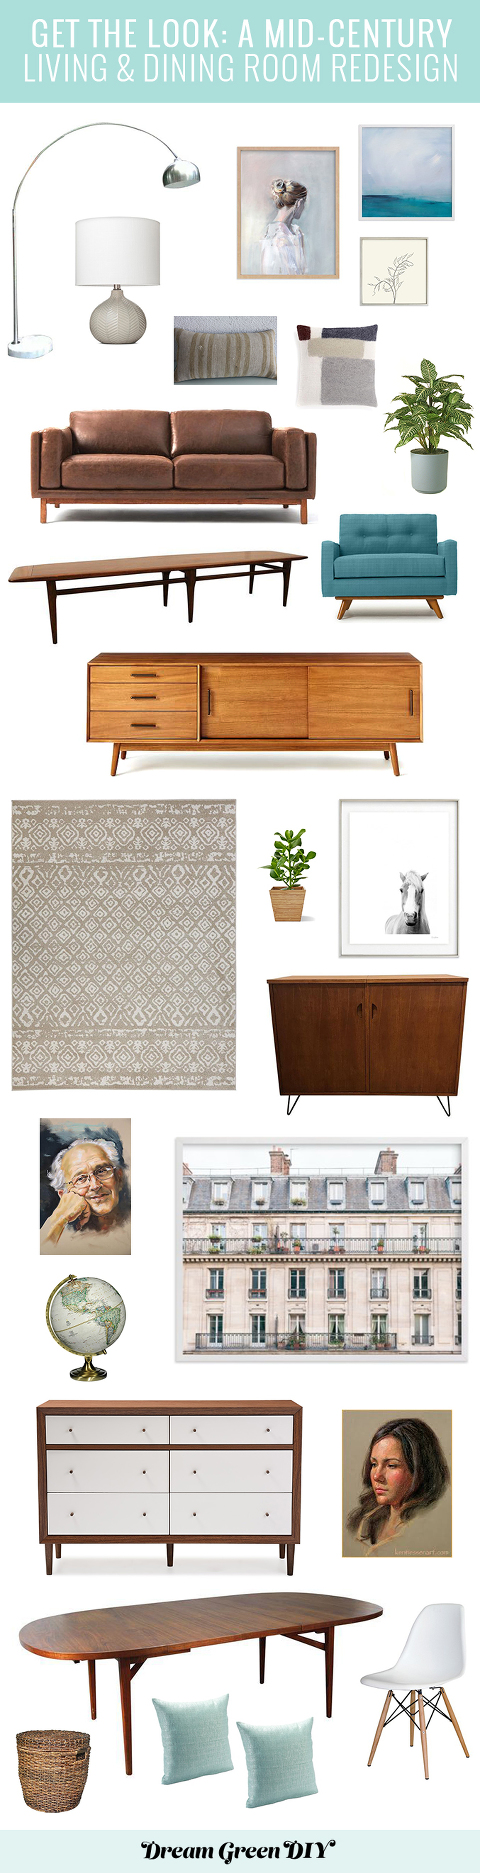 Plans For Our Mid-Century Living & Dining Room Redesign | dreamgreendiy.com + @minted